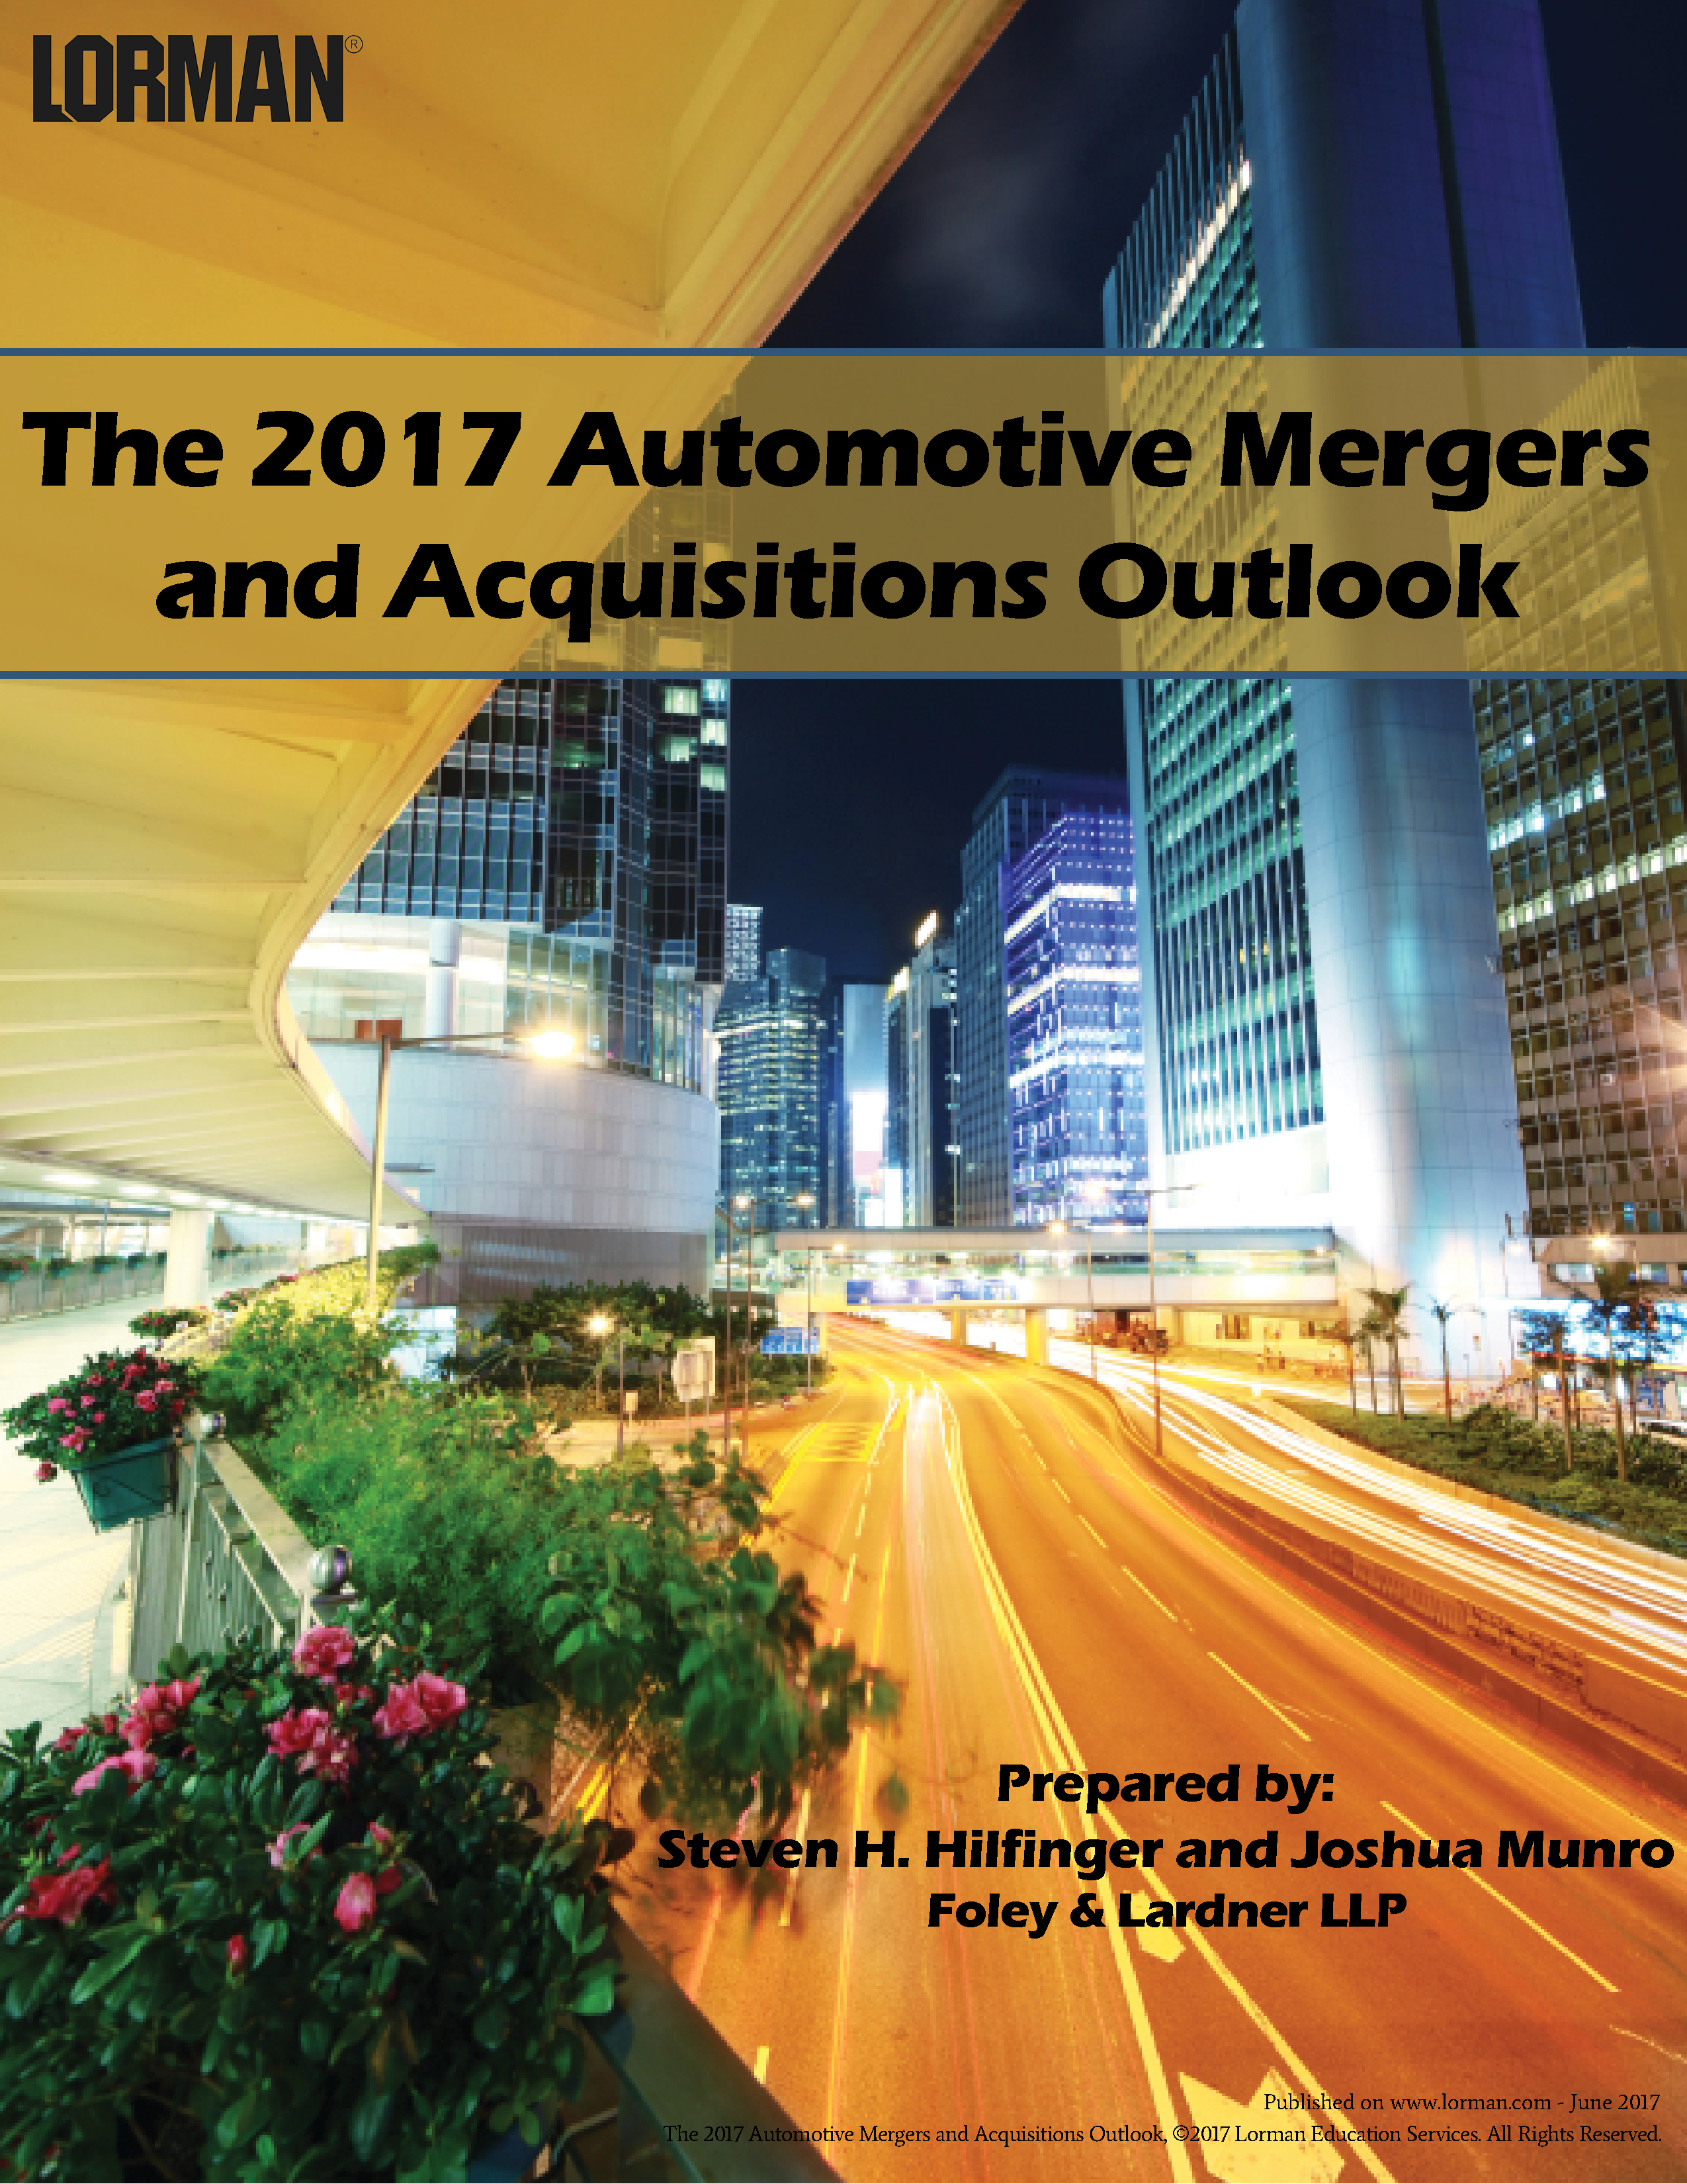 The 2017 Automotive Mergers and Acquisitions Outlook